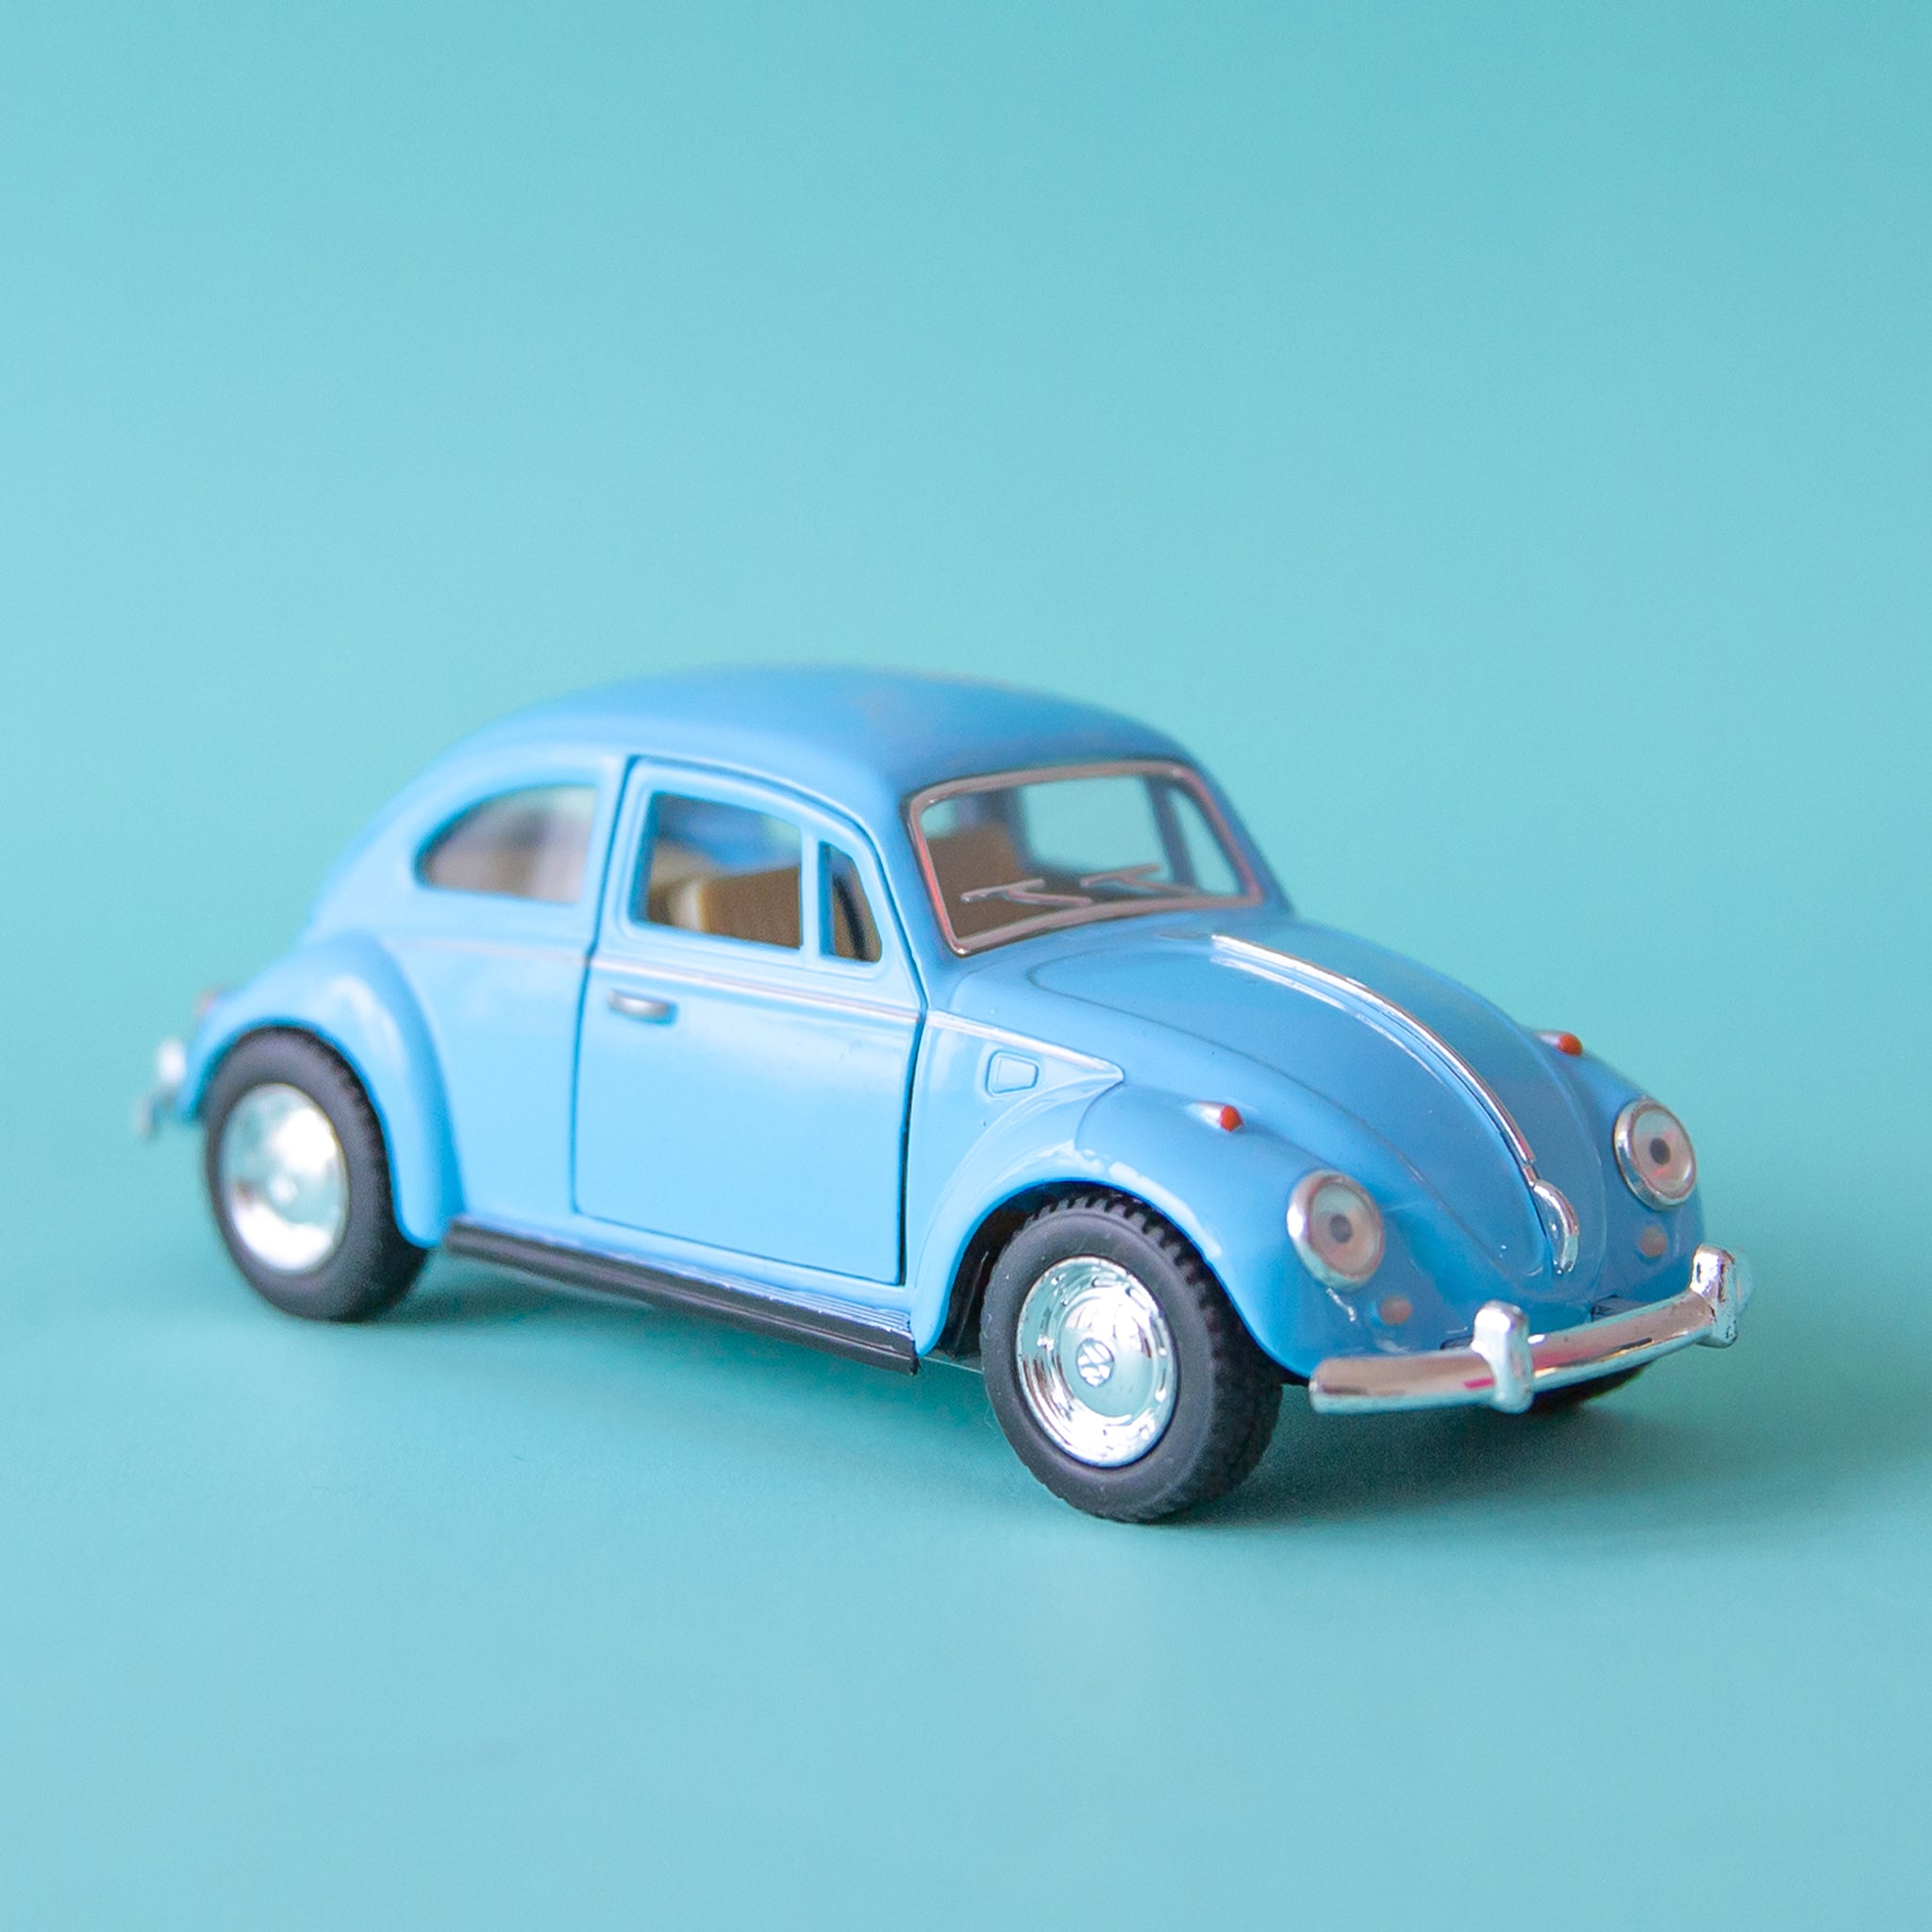 On a blue background is a blue VW beetle toy car.